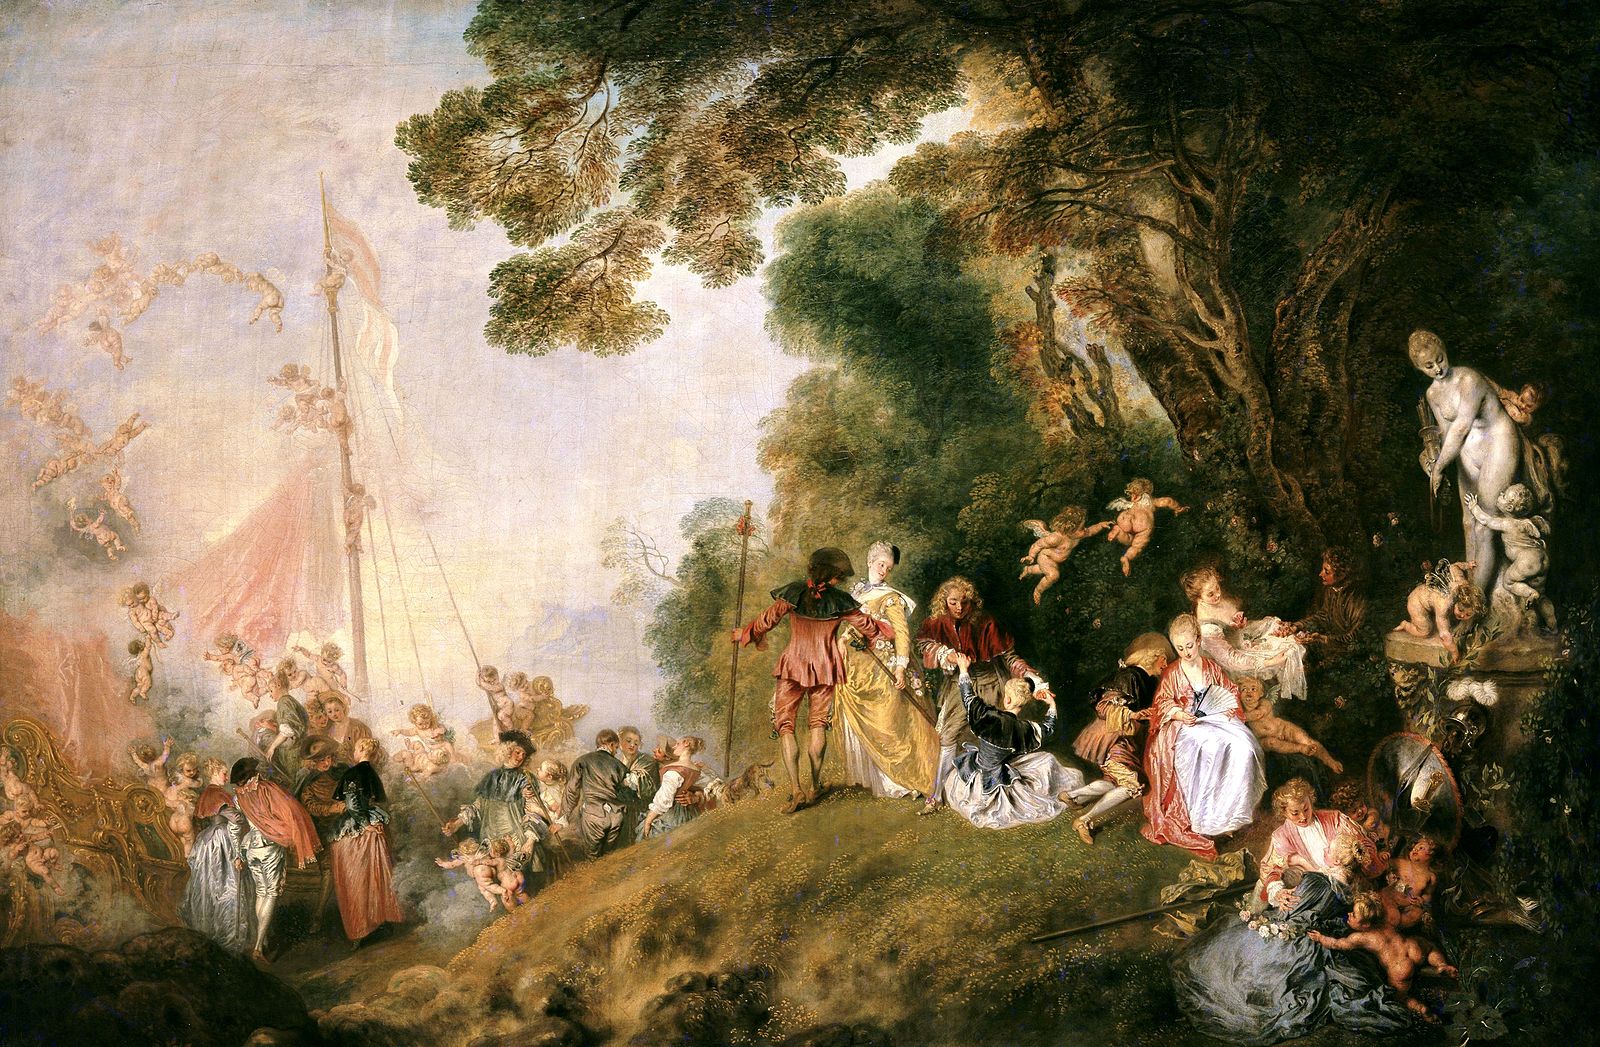 Several people embarking on a ship while others are on the hill surrounding the boat with several putti flying around